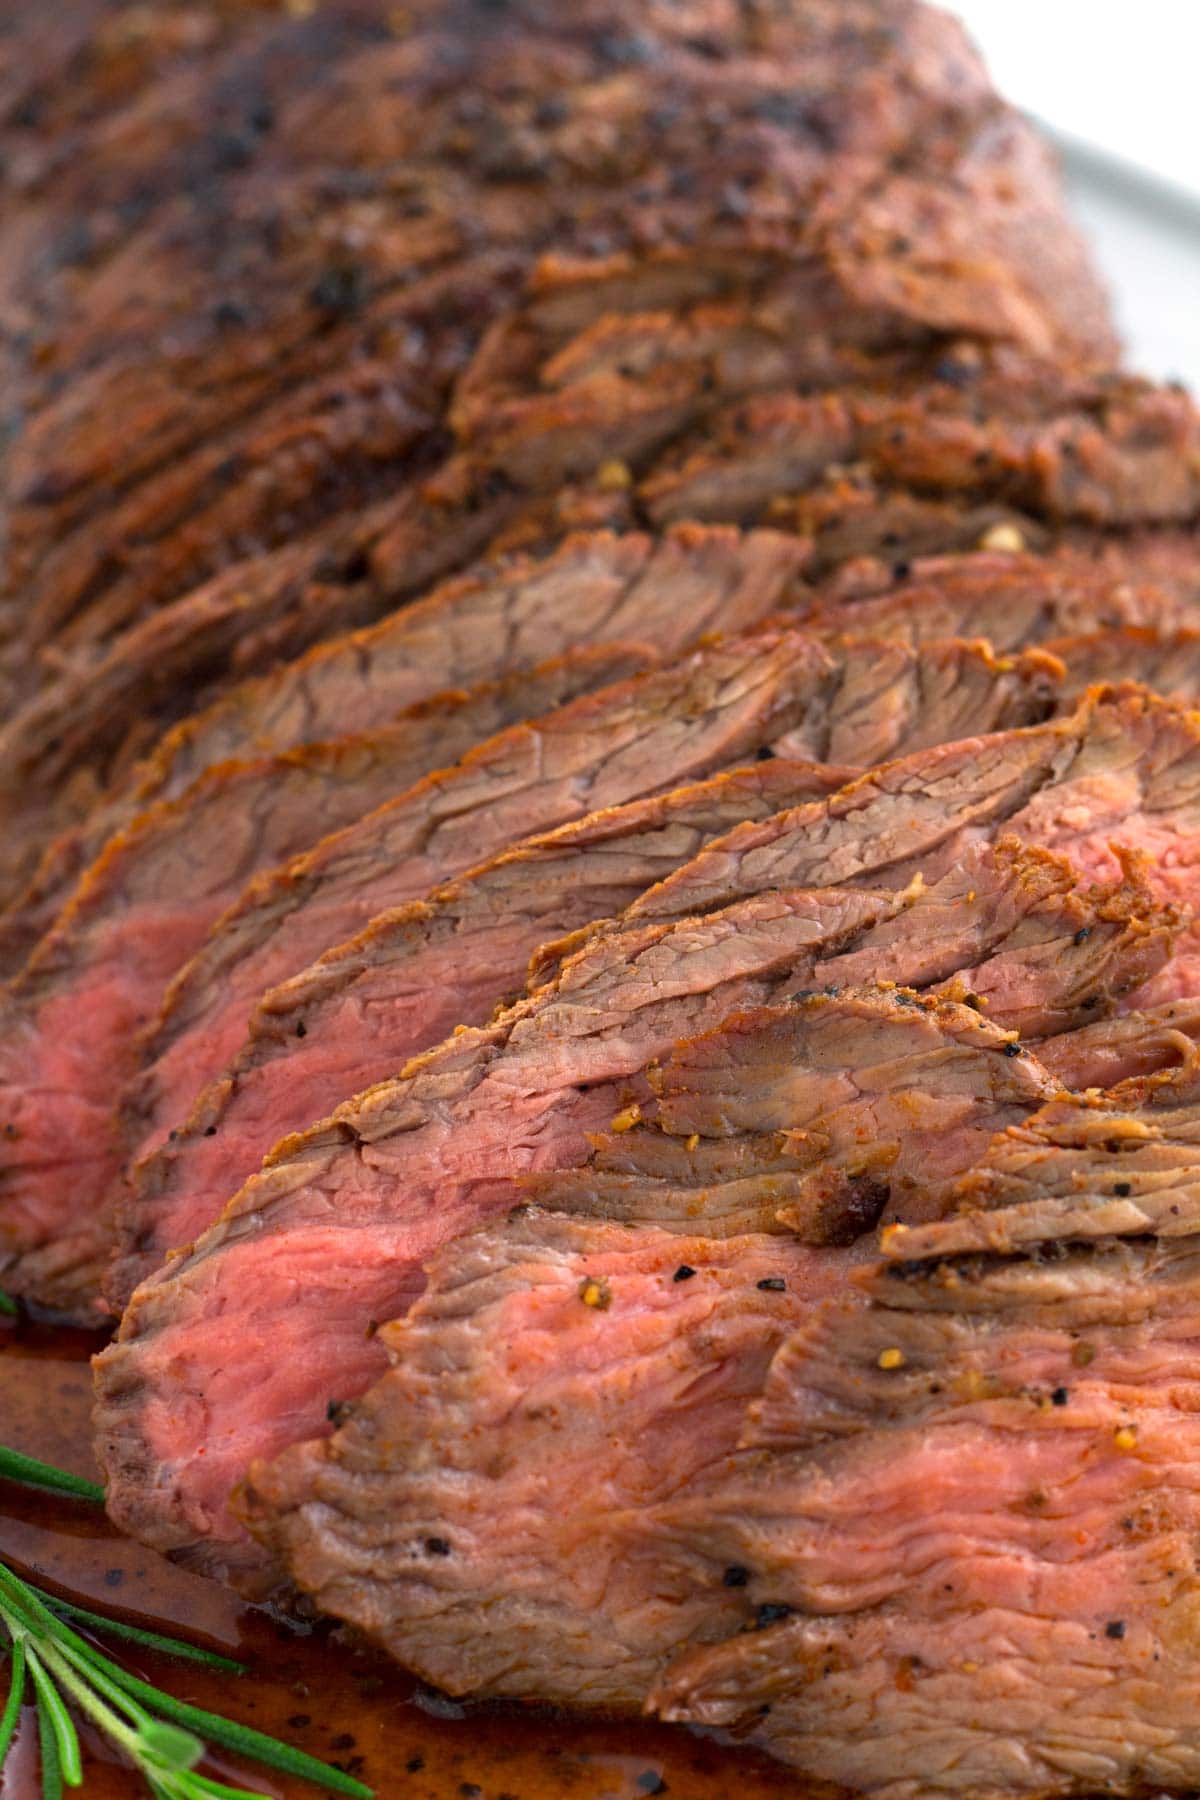 Layered slices of tri-tip roast with smoked flavor on serving plate.